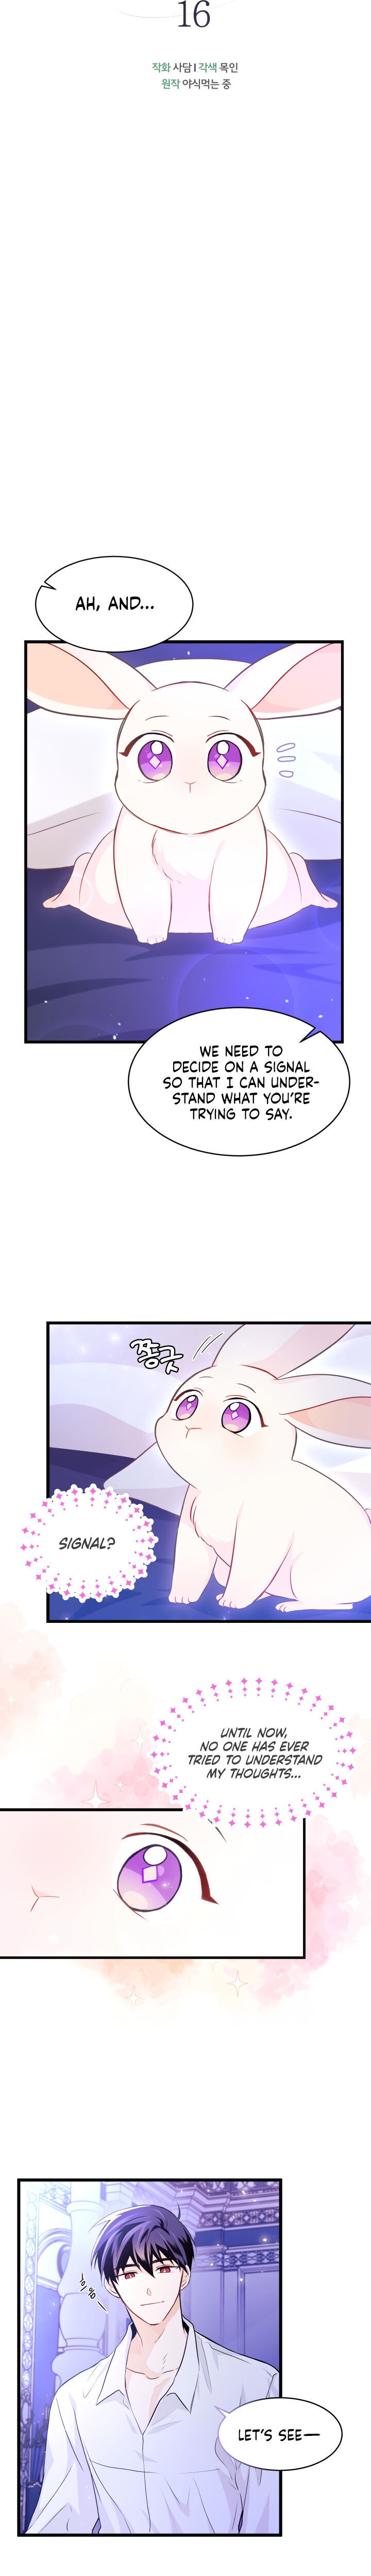 The Symbiotic Relationship Between A Rabbit and A Black Panther - Chapter 16 Page 3